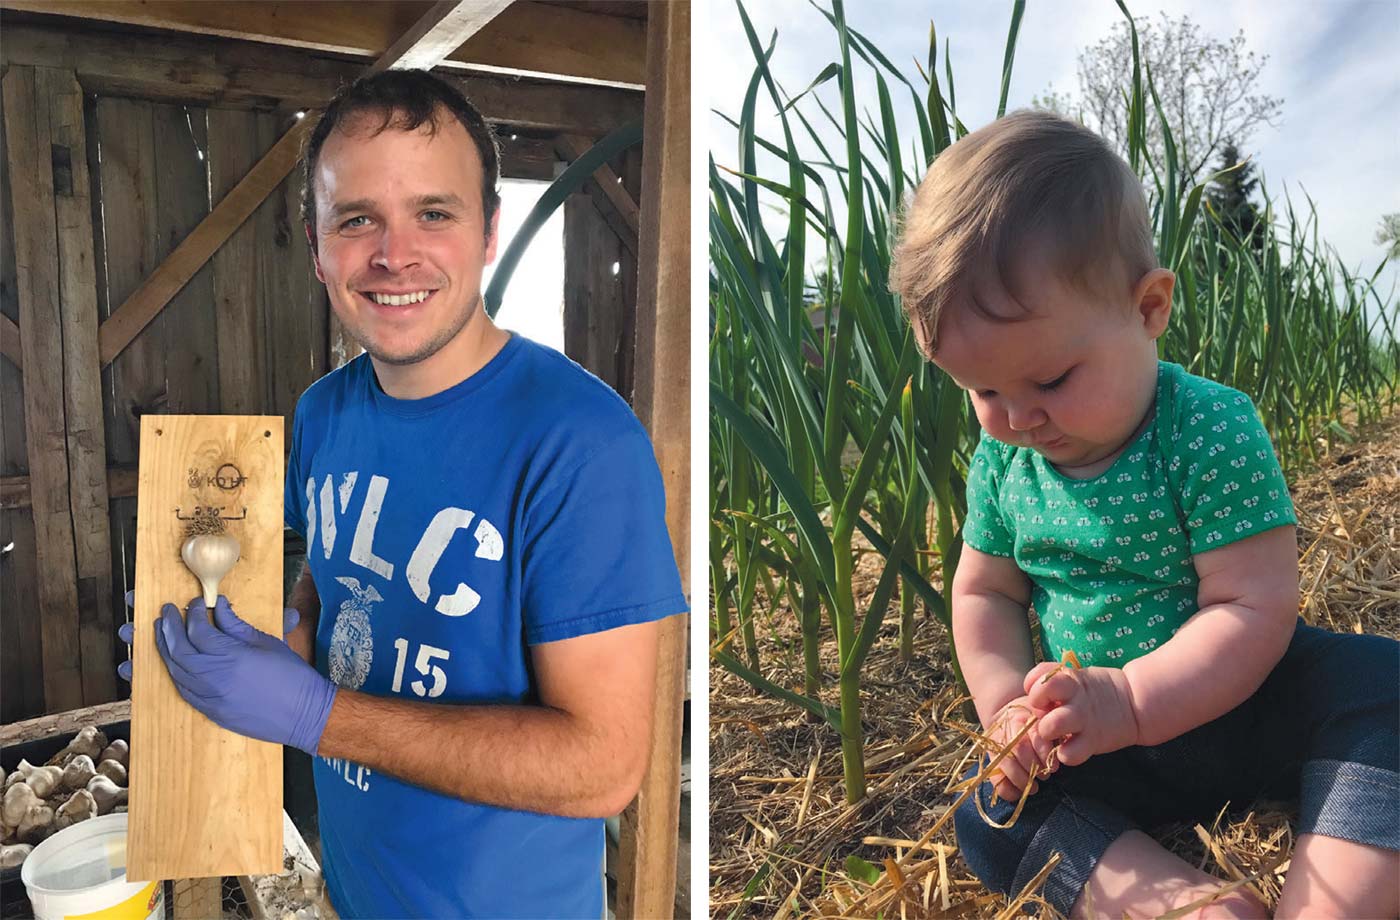 LEFT: Brian Guza with the tool he invented to measure the width of each bulb. If the bulb is 2 inches or more in diameter, that’s considered seed garlic (or planting garlic). Anything less than 2 inches is for eating. RIGHT: Daughter Mary in the garlic field.